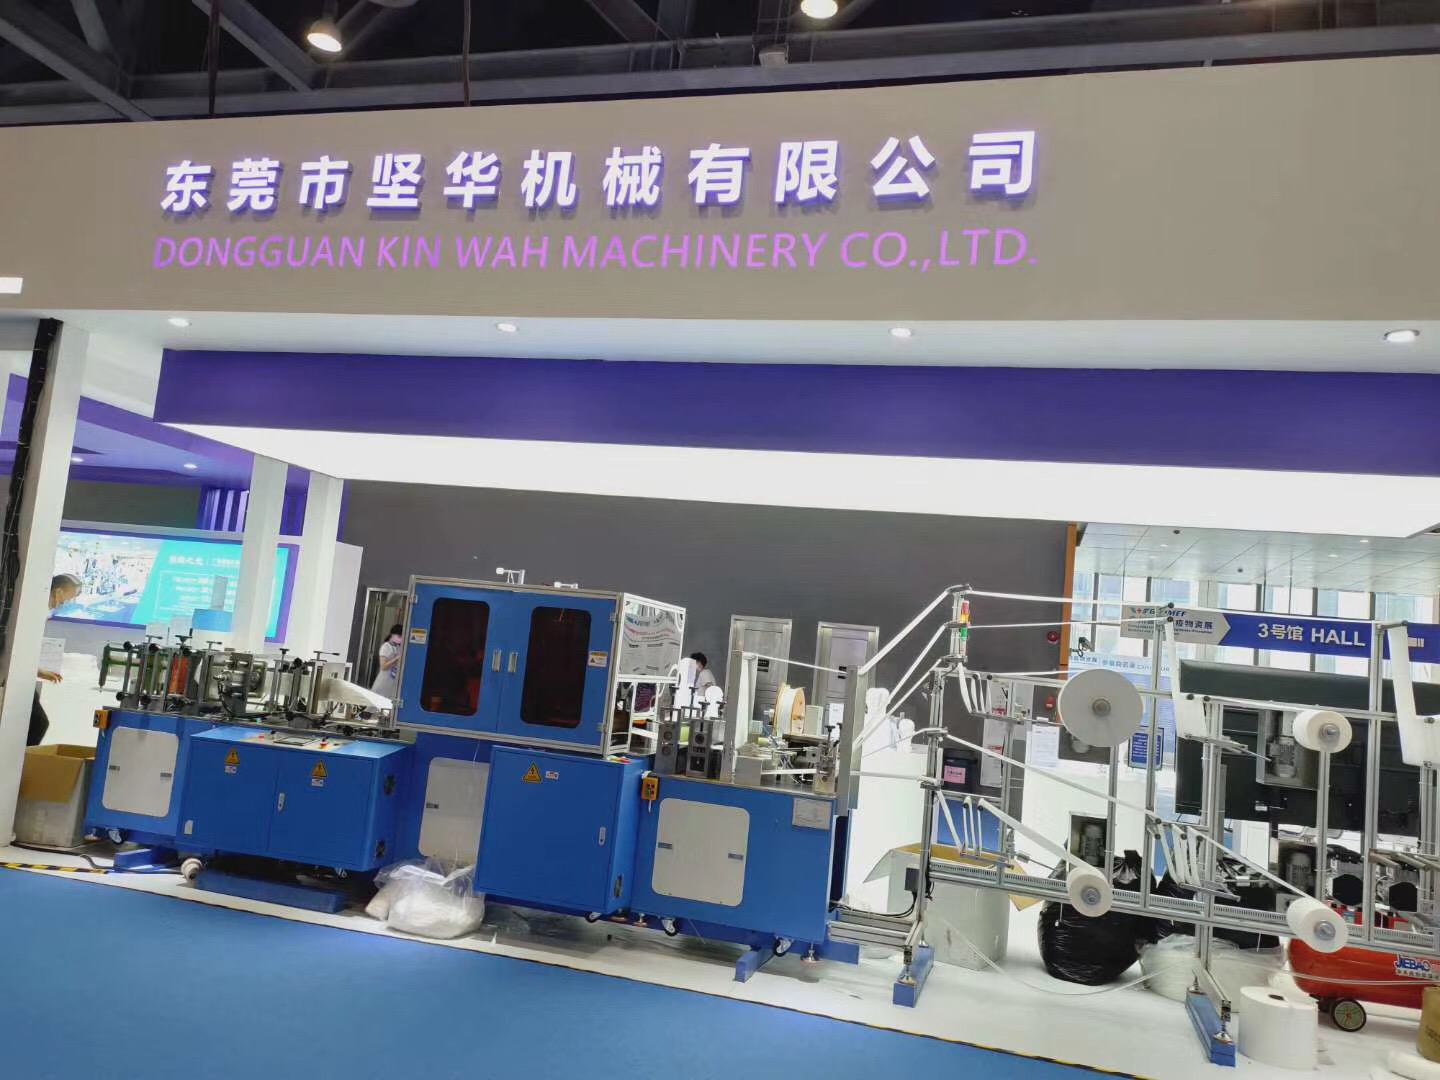 The International Epidemic prevention materials Exhibition on Guangzhou